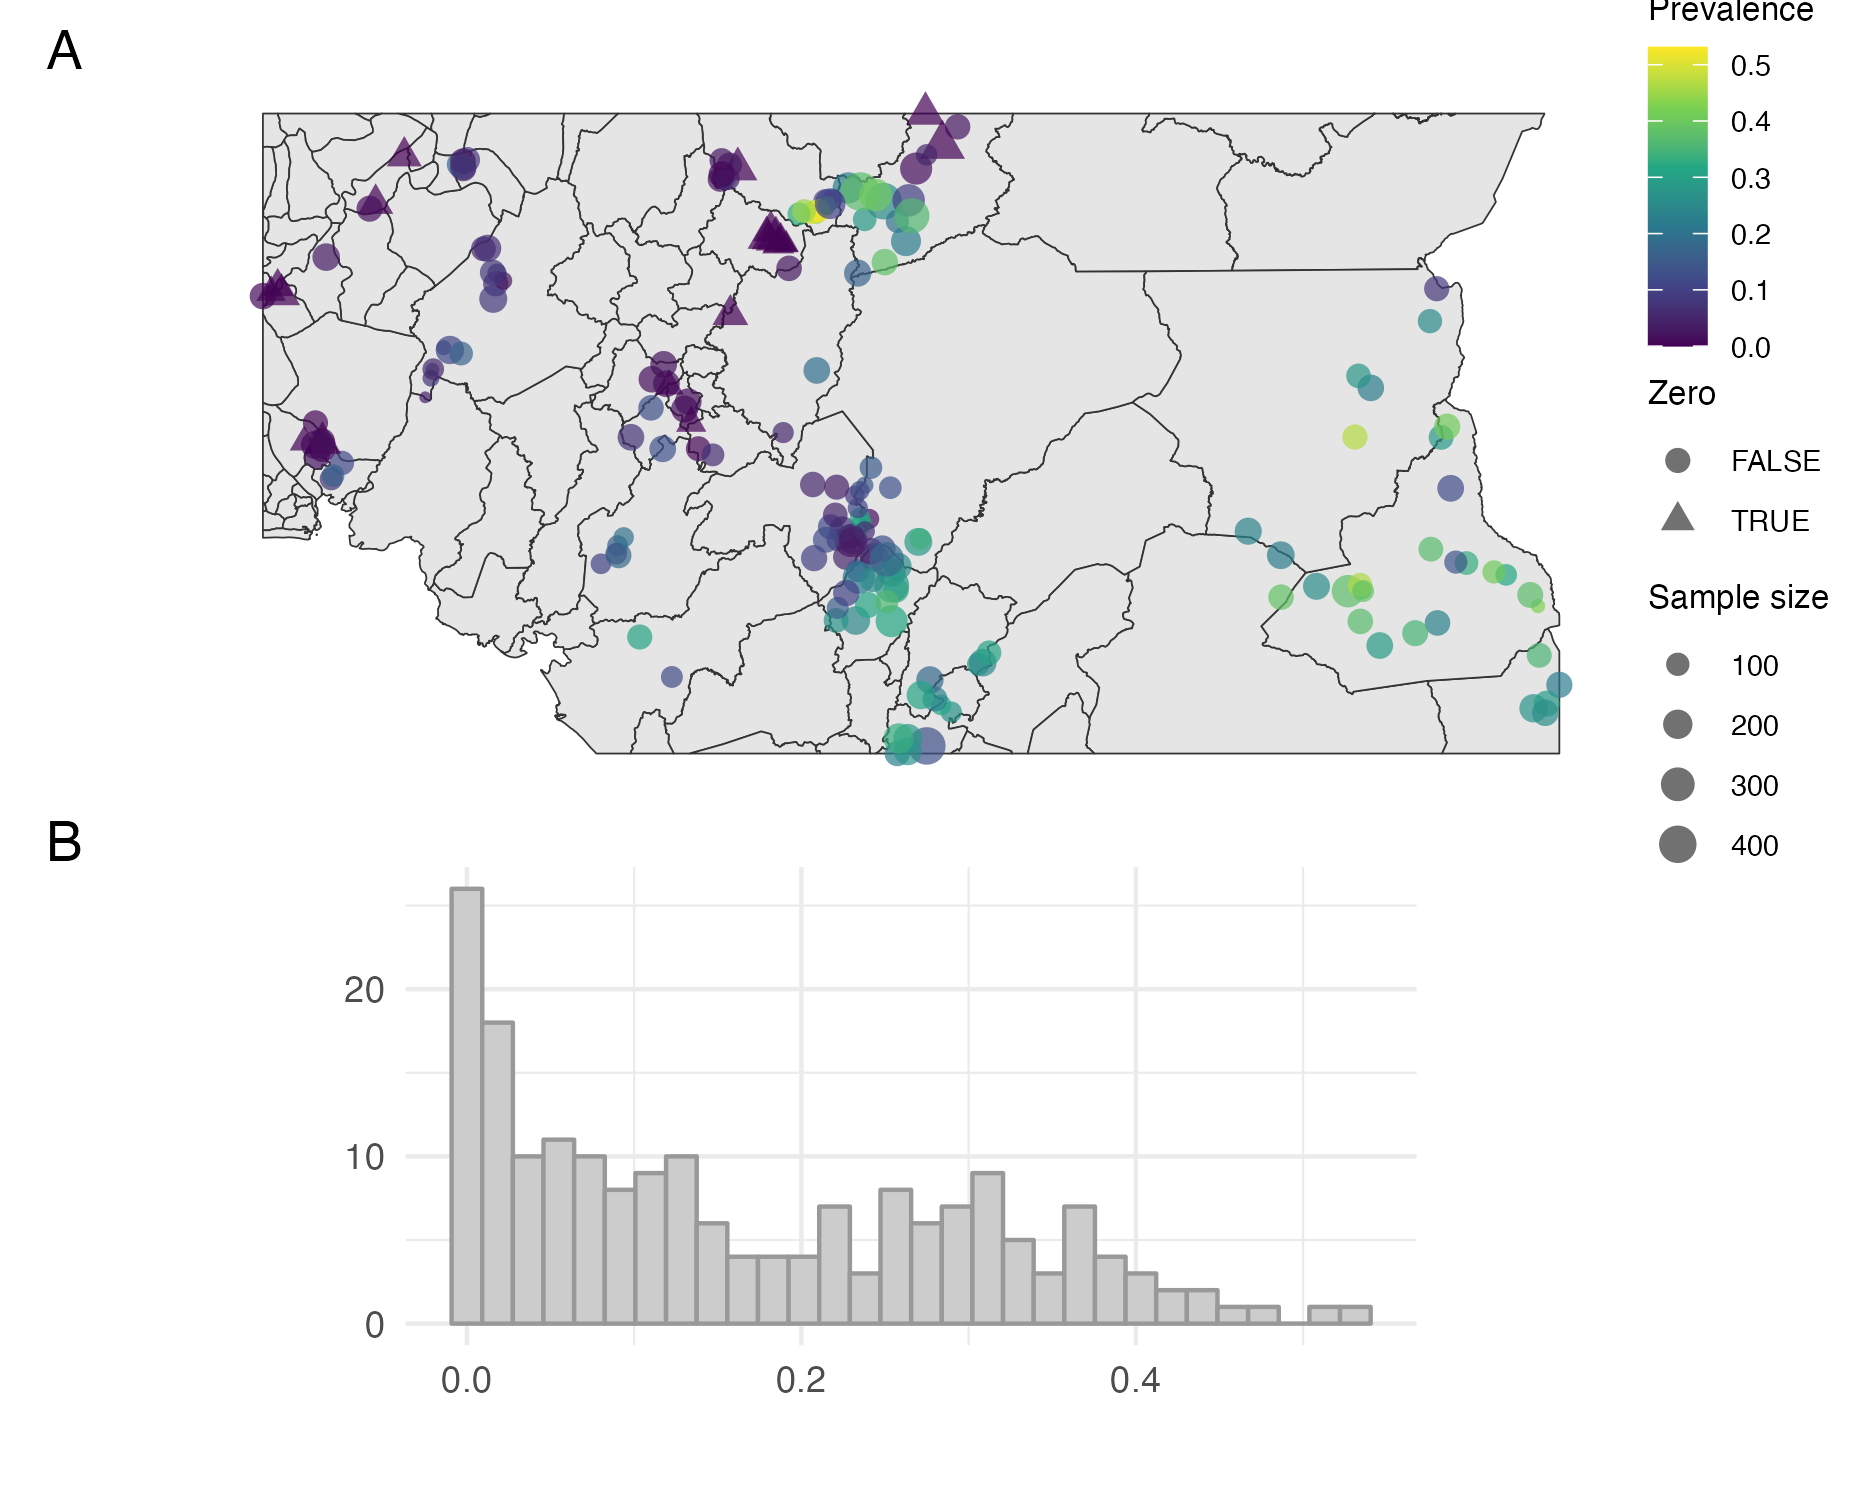 Empirical prevalence of Loa loa in 190 sampled villages in Cameroon and Nigeria. The map in Panel A shows the village locations, empirical prevalences, presence of zeros, and sample sizes. The zeros are typically located in close proximity to each other. The histogram in Panel B shows the empirical prevalences, and high number of zeros.